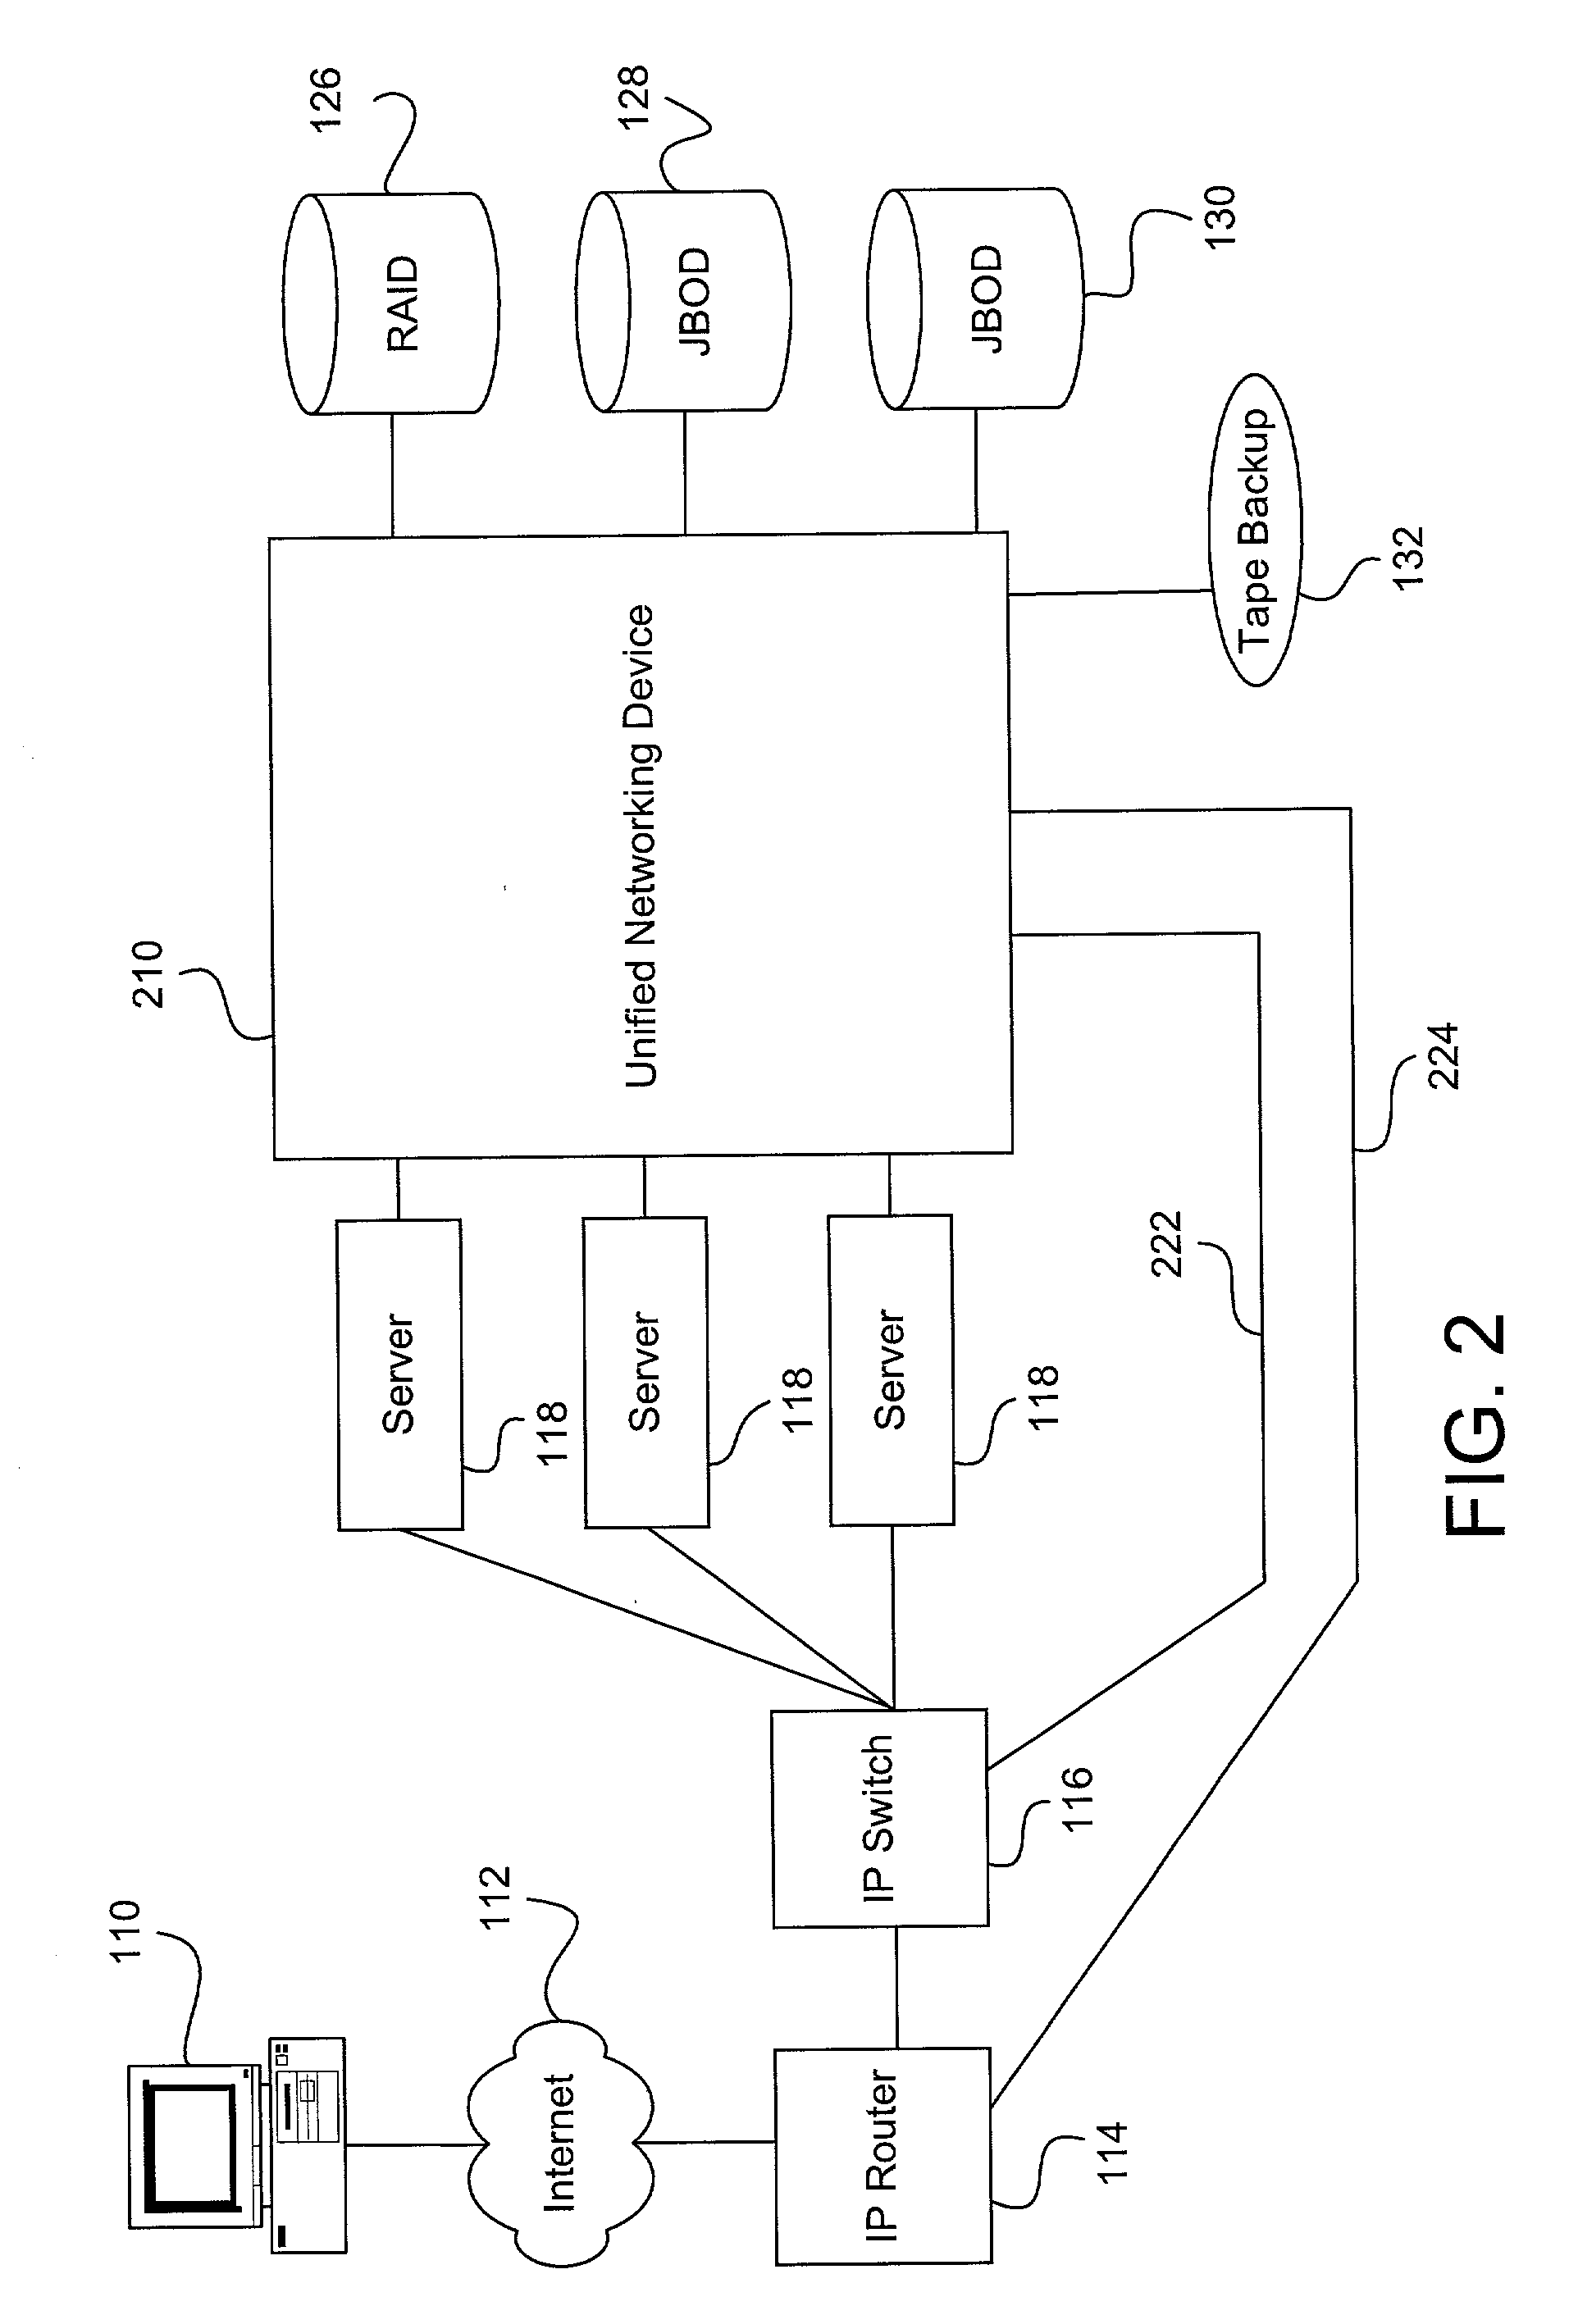 Providing a single hop communication path between a storage device and a network switch